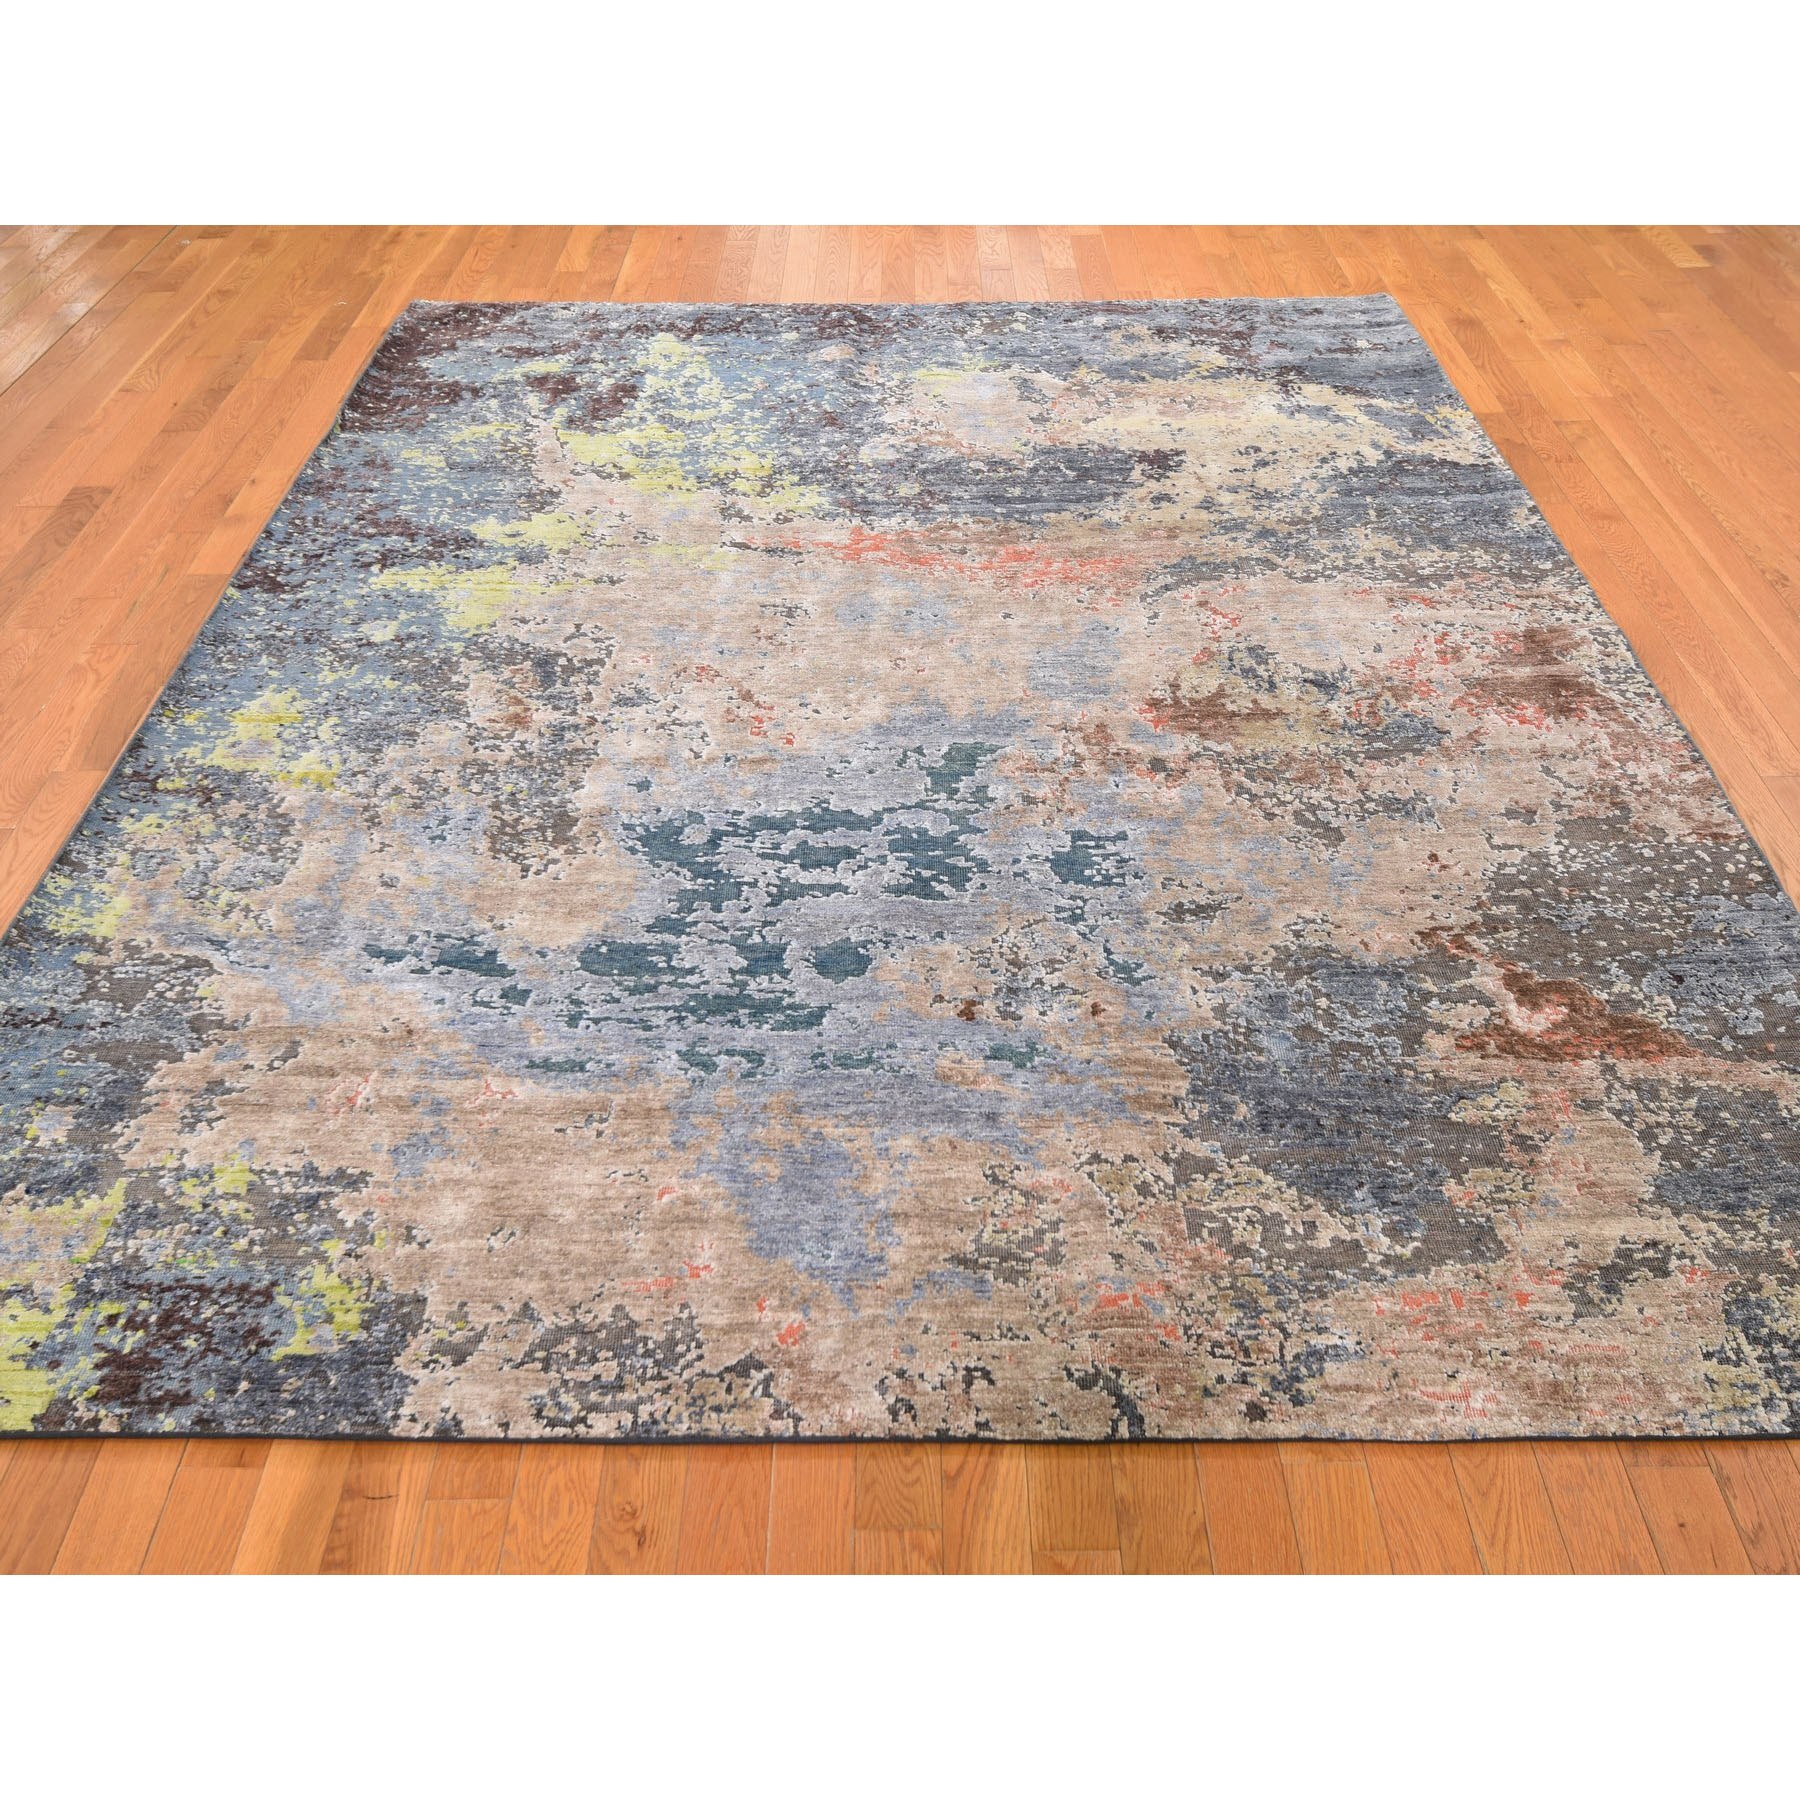 7-10 x10-1  Wool and Silk Hi-Low Pile Modern Abstract Design Hand Knotted Oriental Rug 